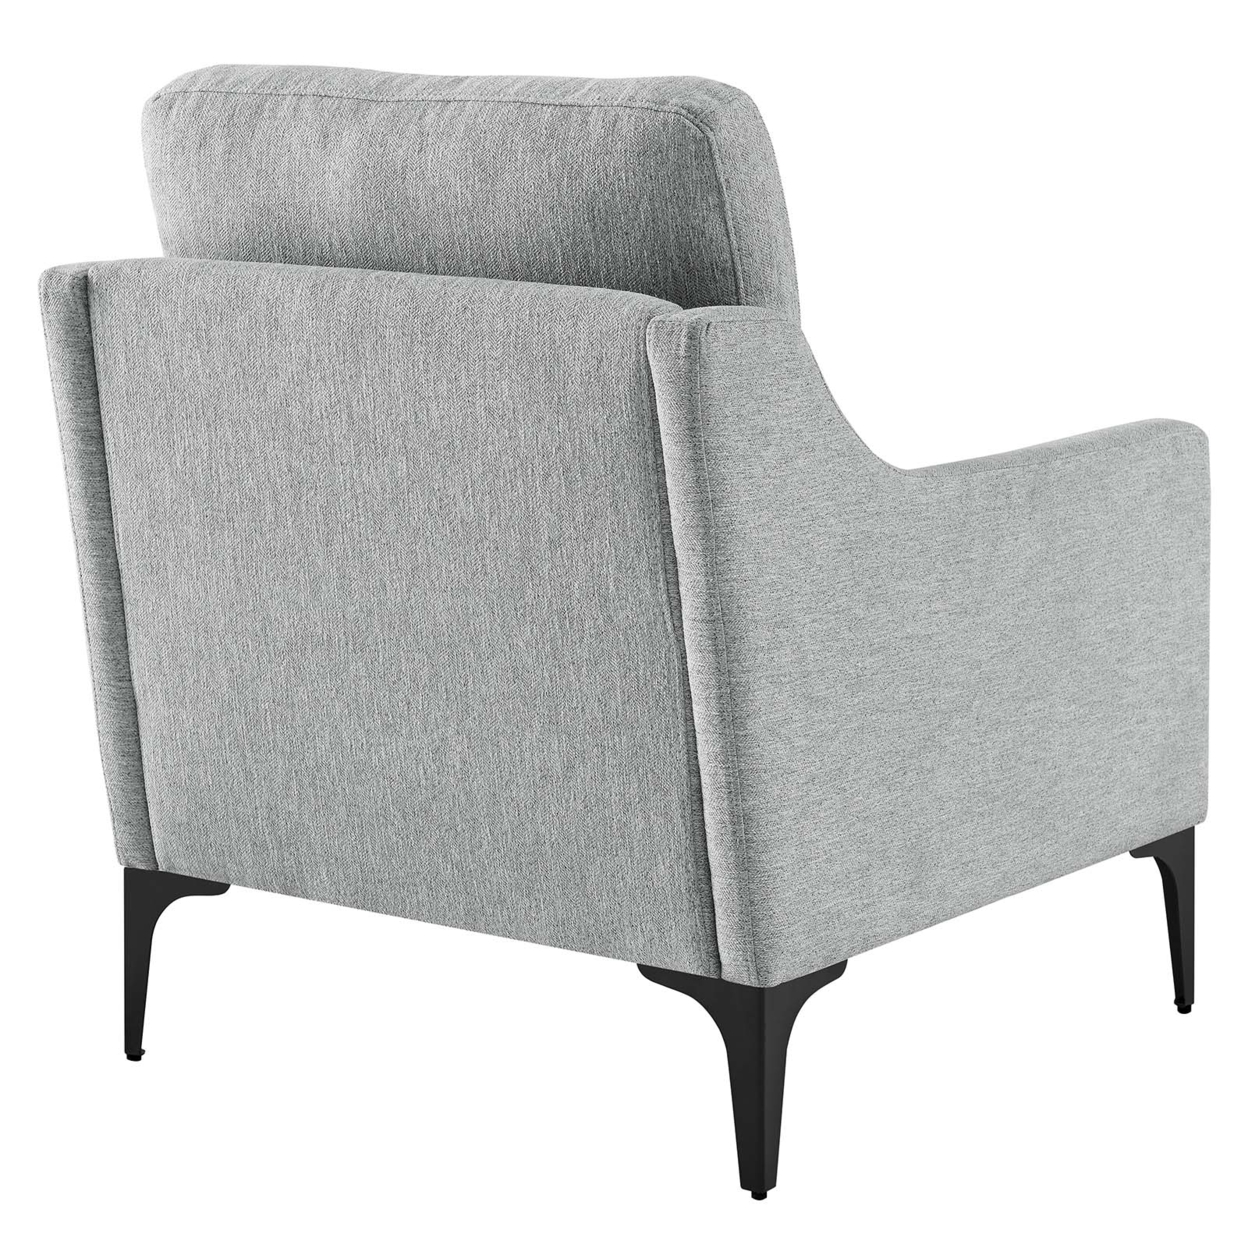 Corland Upholstered Fabric Armchair, Light Gray